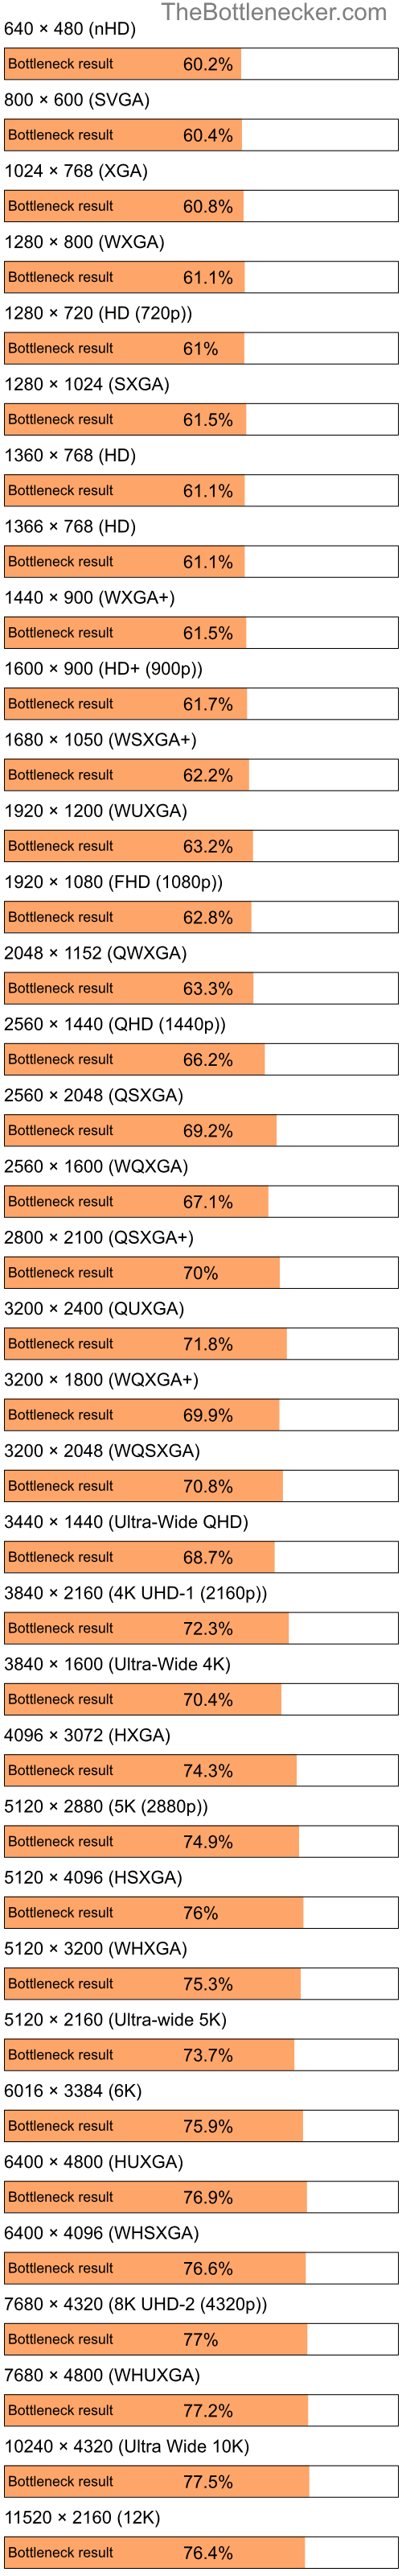 Bottleneck results by resolution for Intel Pentium 4 and NVIDIA Quadro FX 550 in Processor Intense Tasks